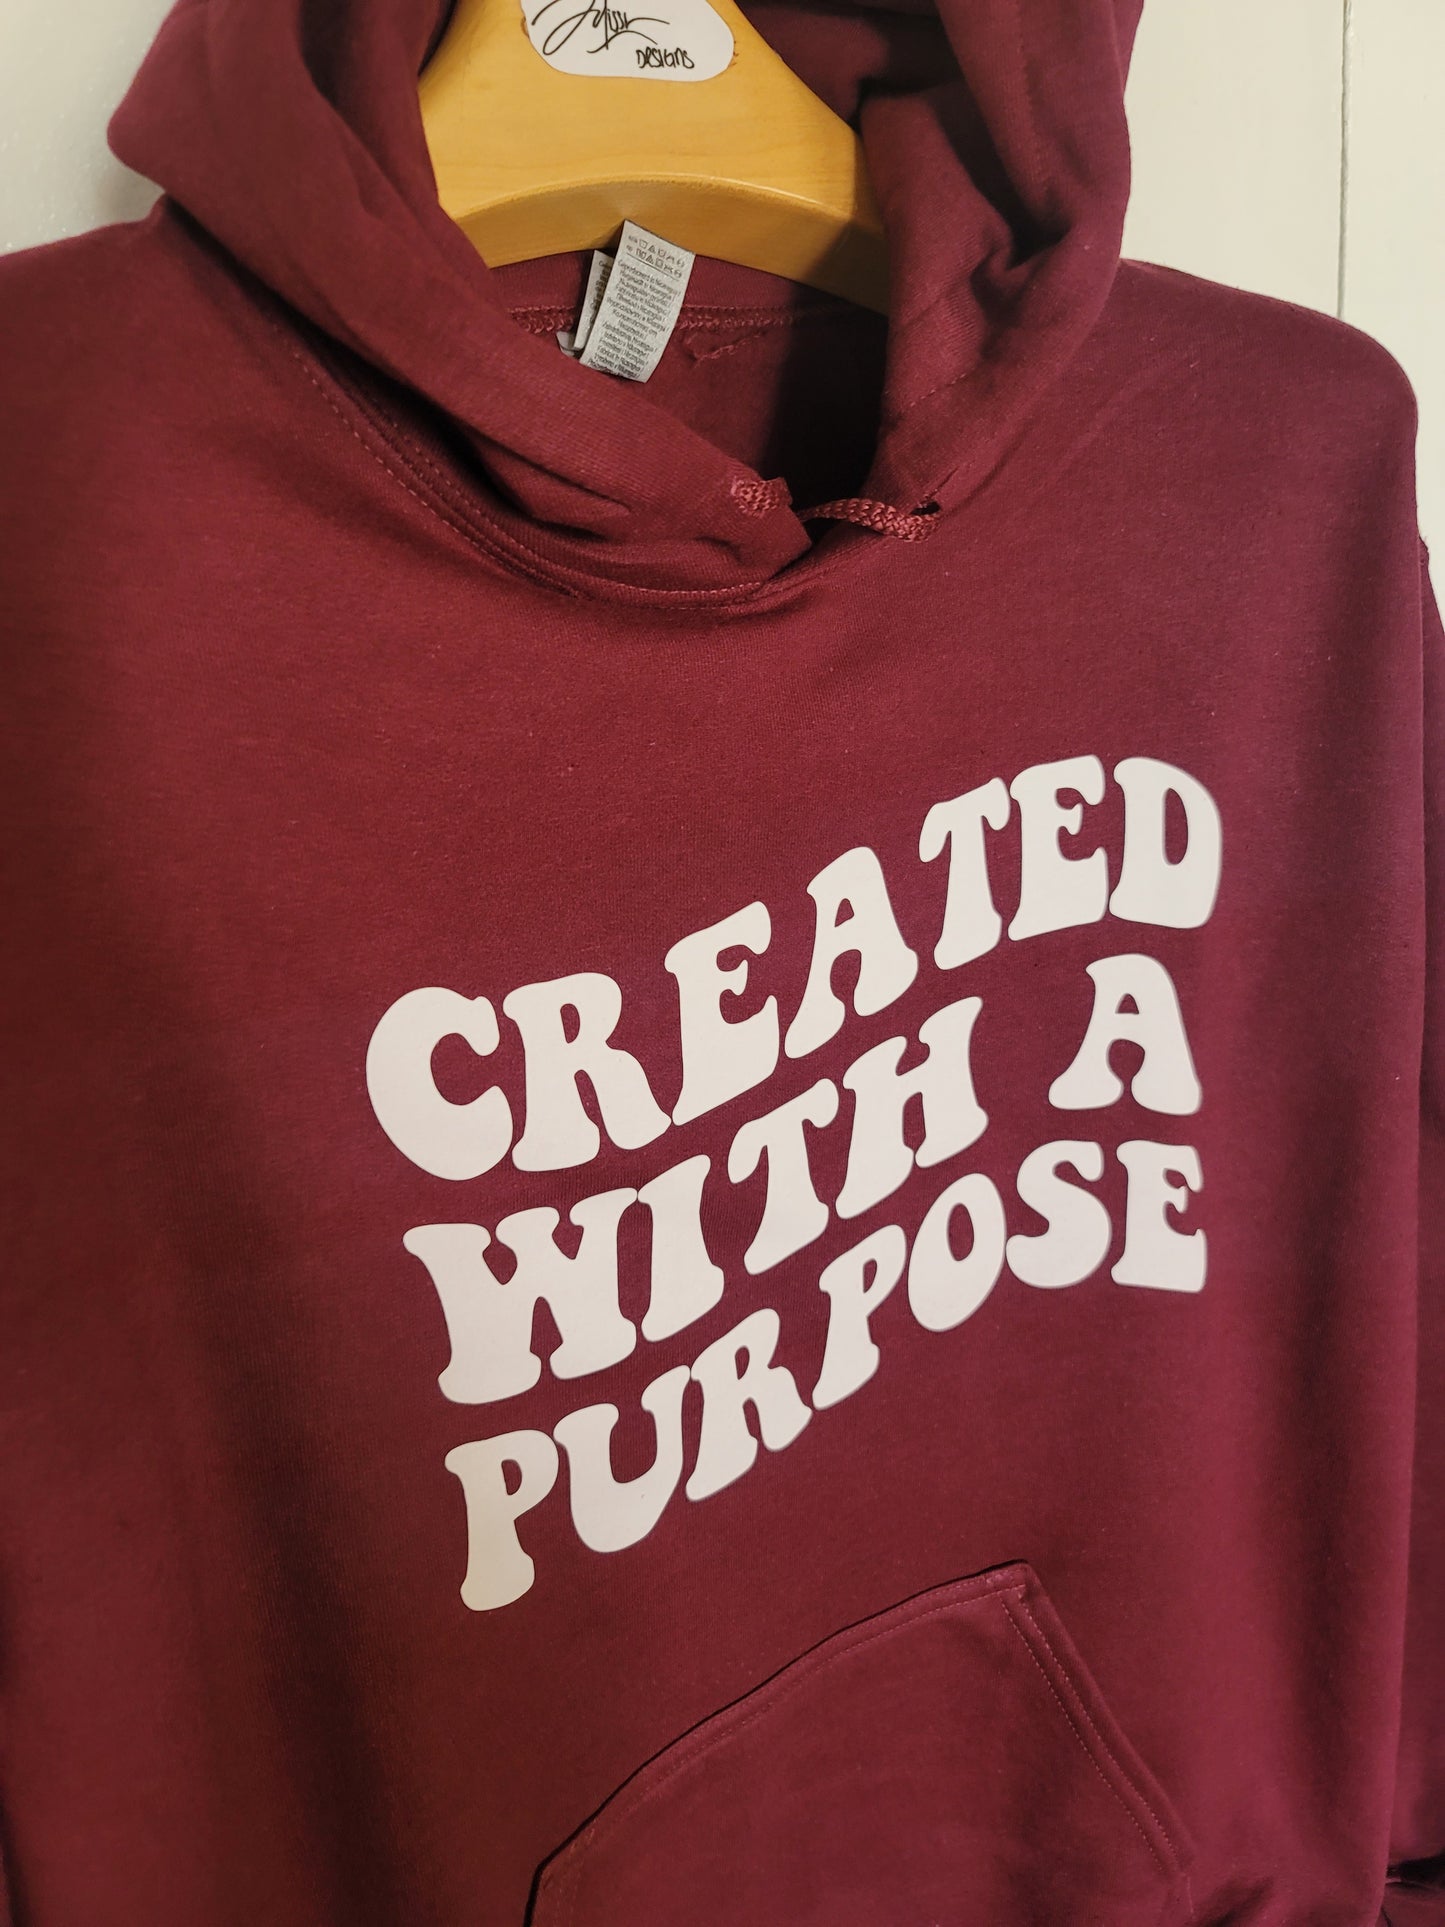 Created with a purpose Maroon Adult Unisex Heavy Blend